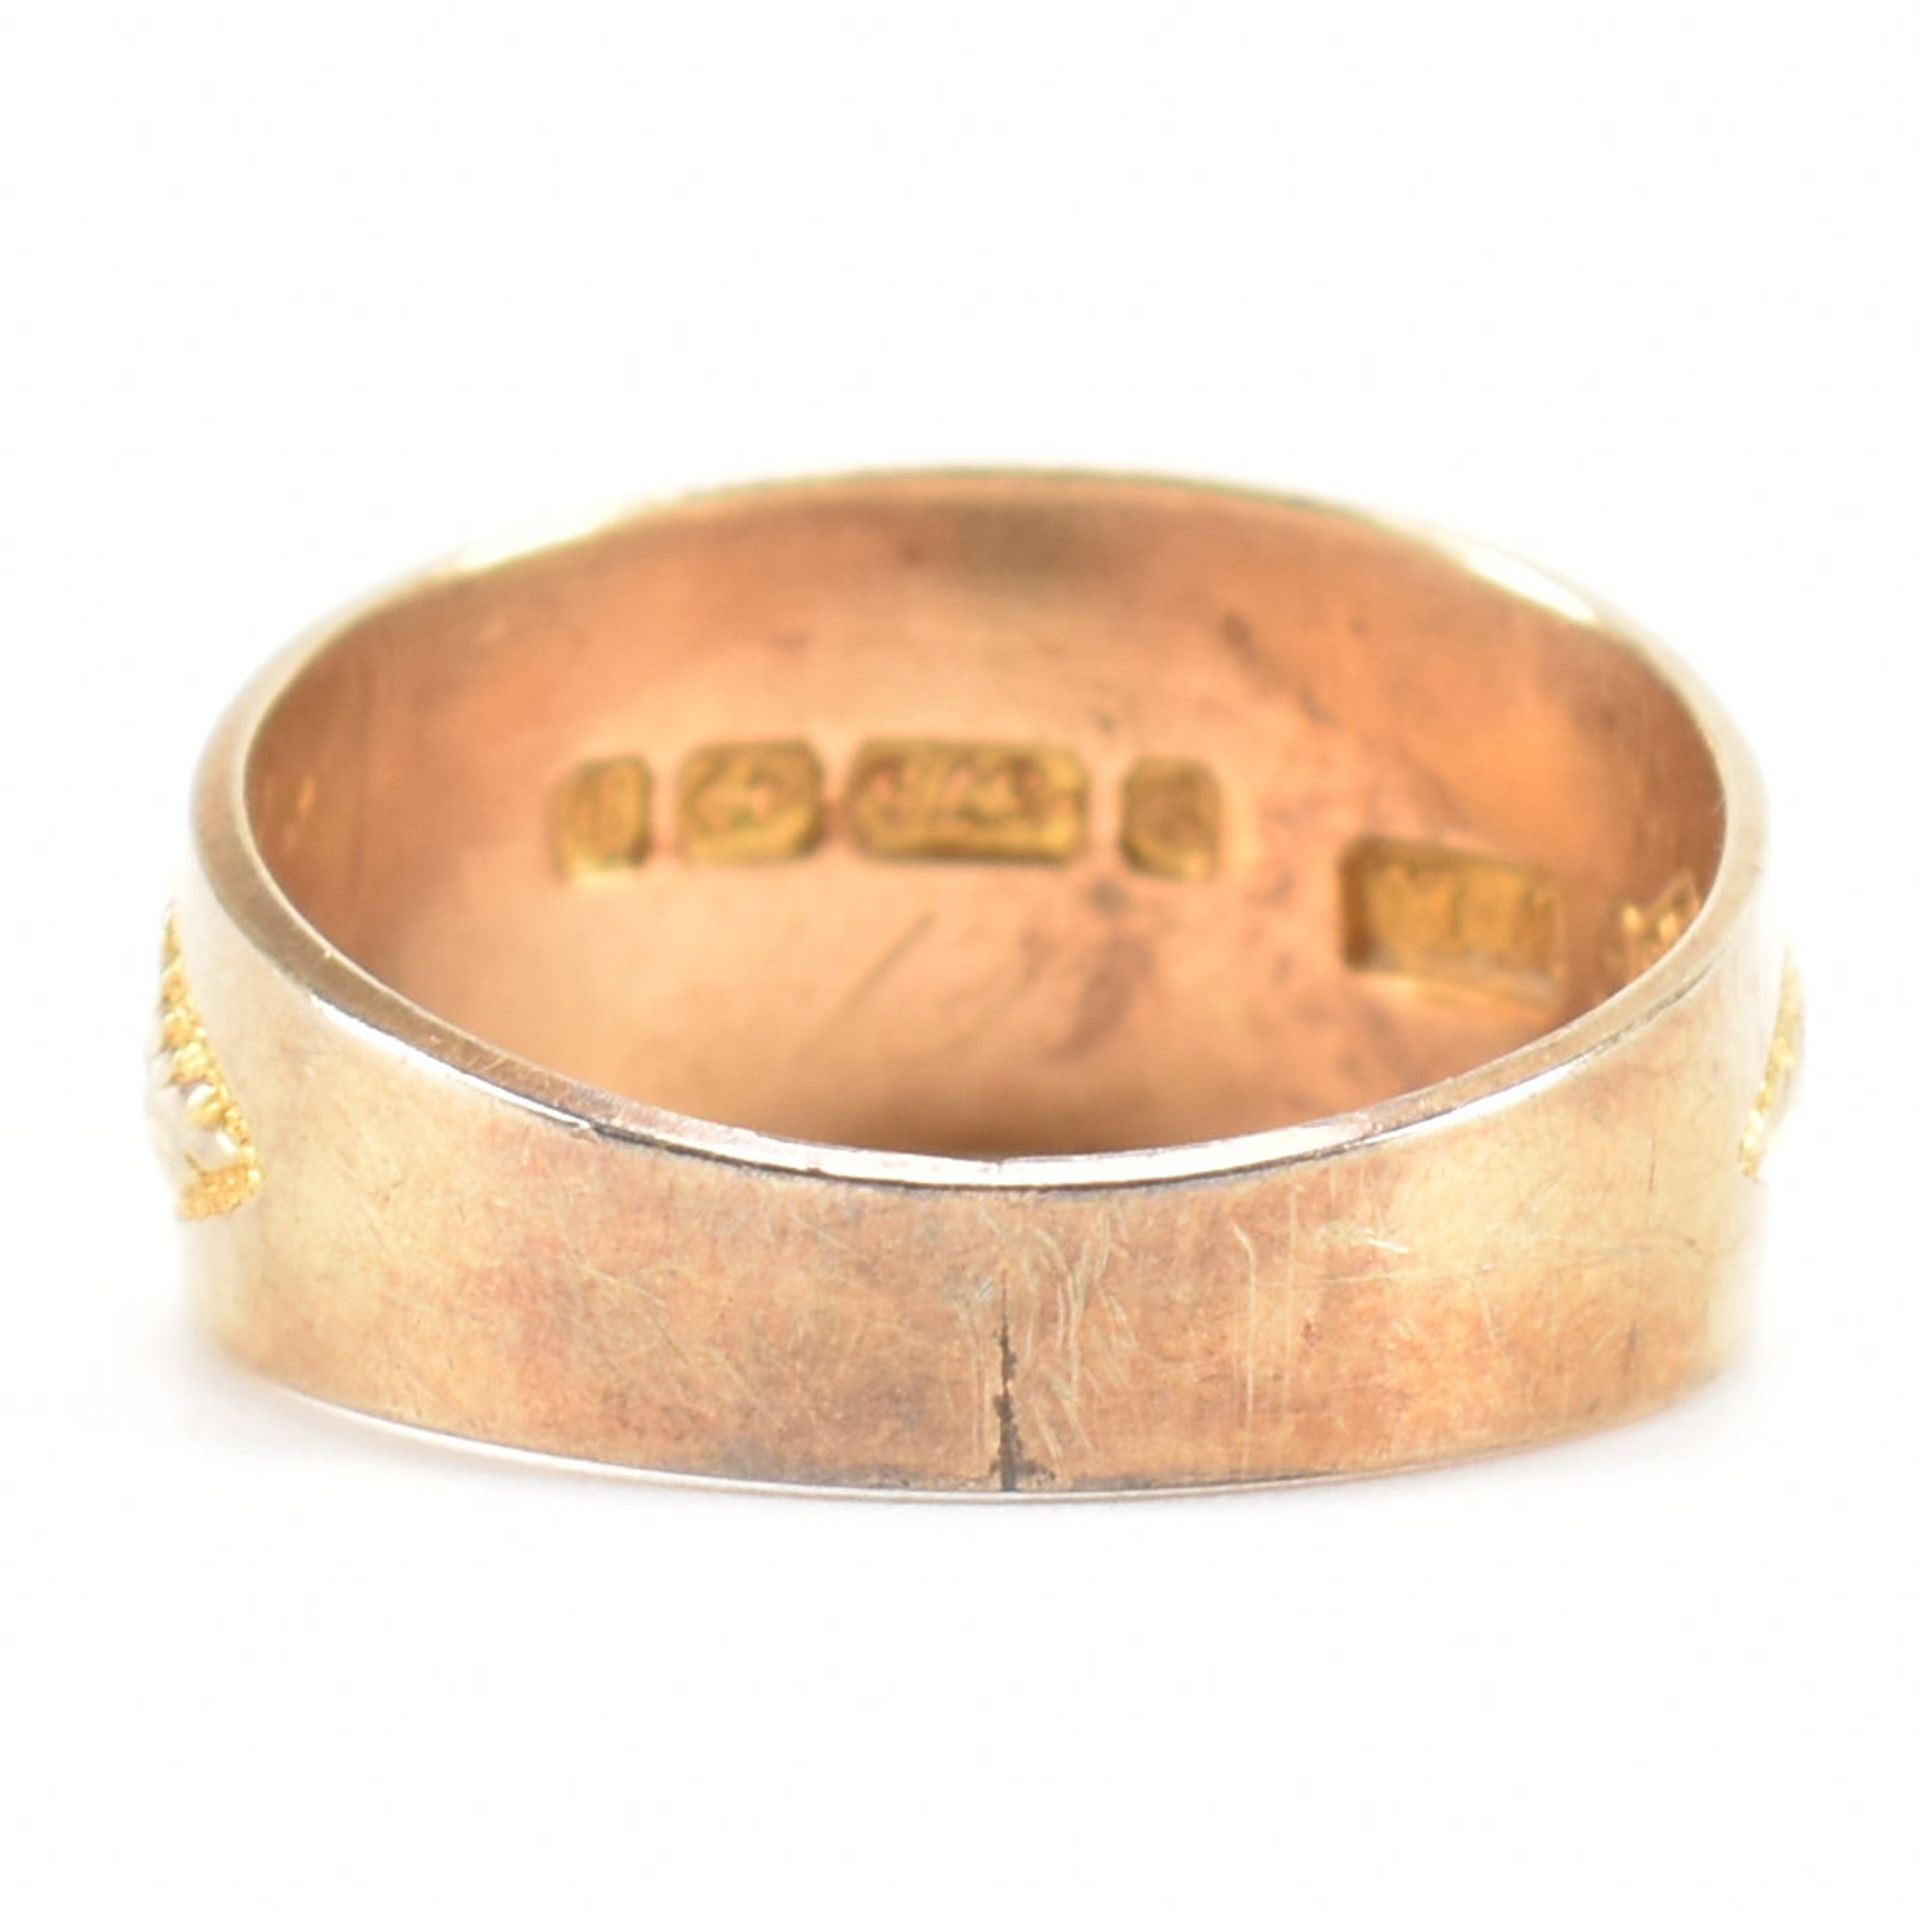 HALLMARKED VICTORIAN 9CT GOLD ETCHED BAND RING - Image 3 of 8